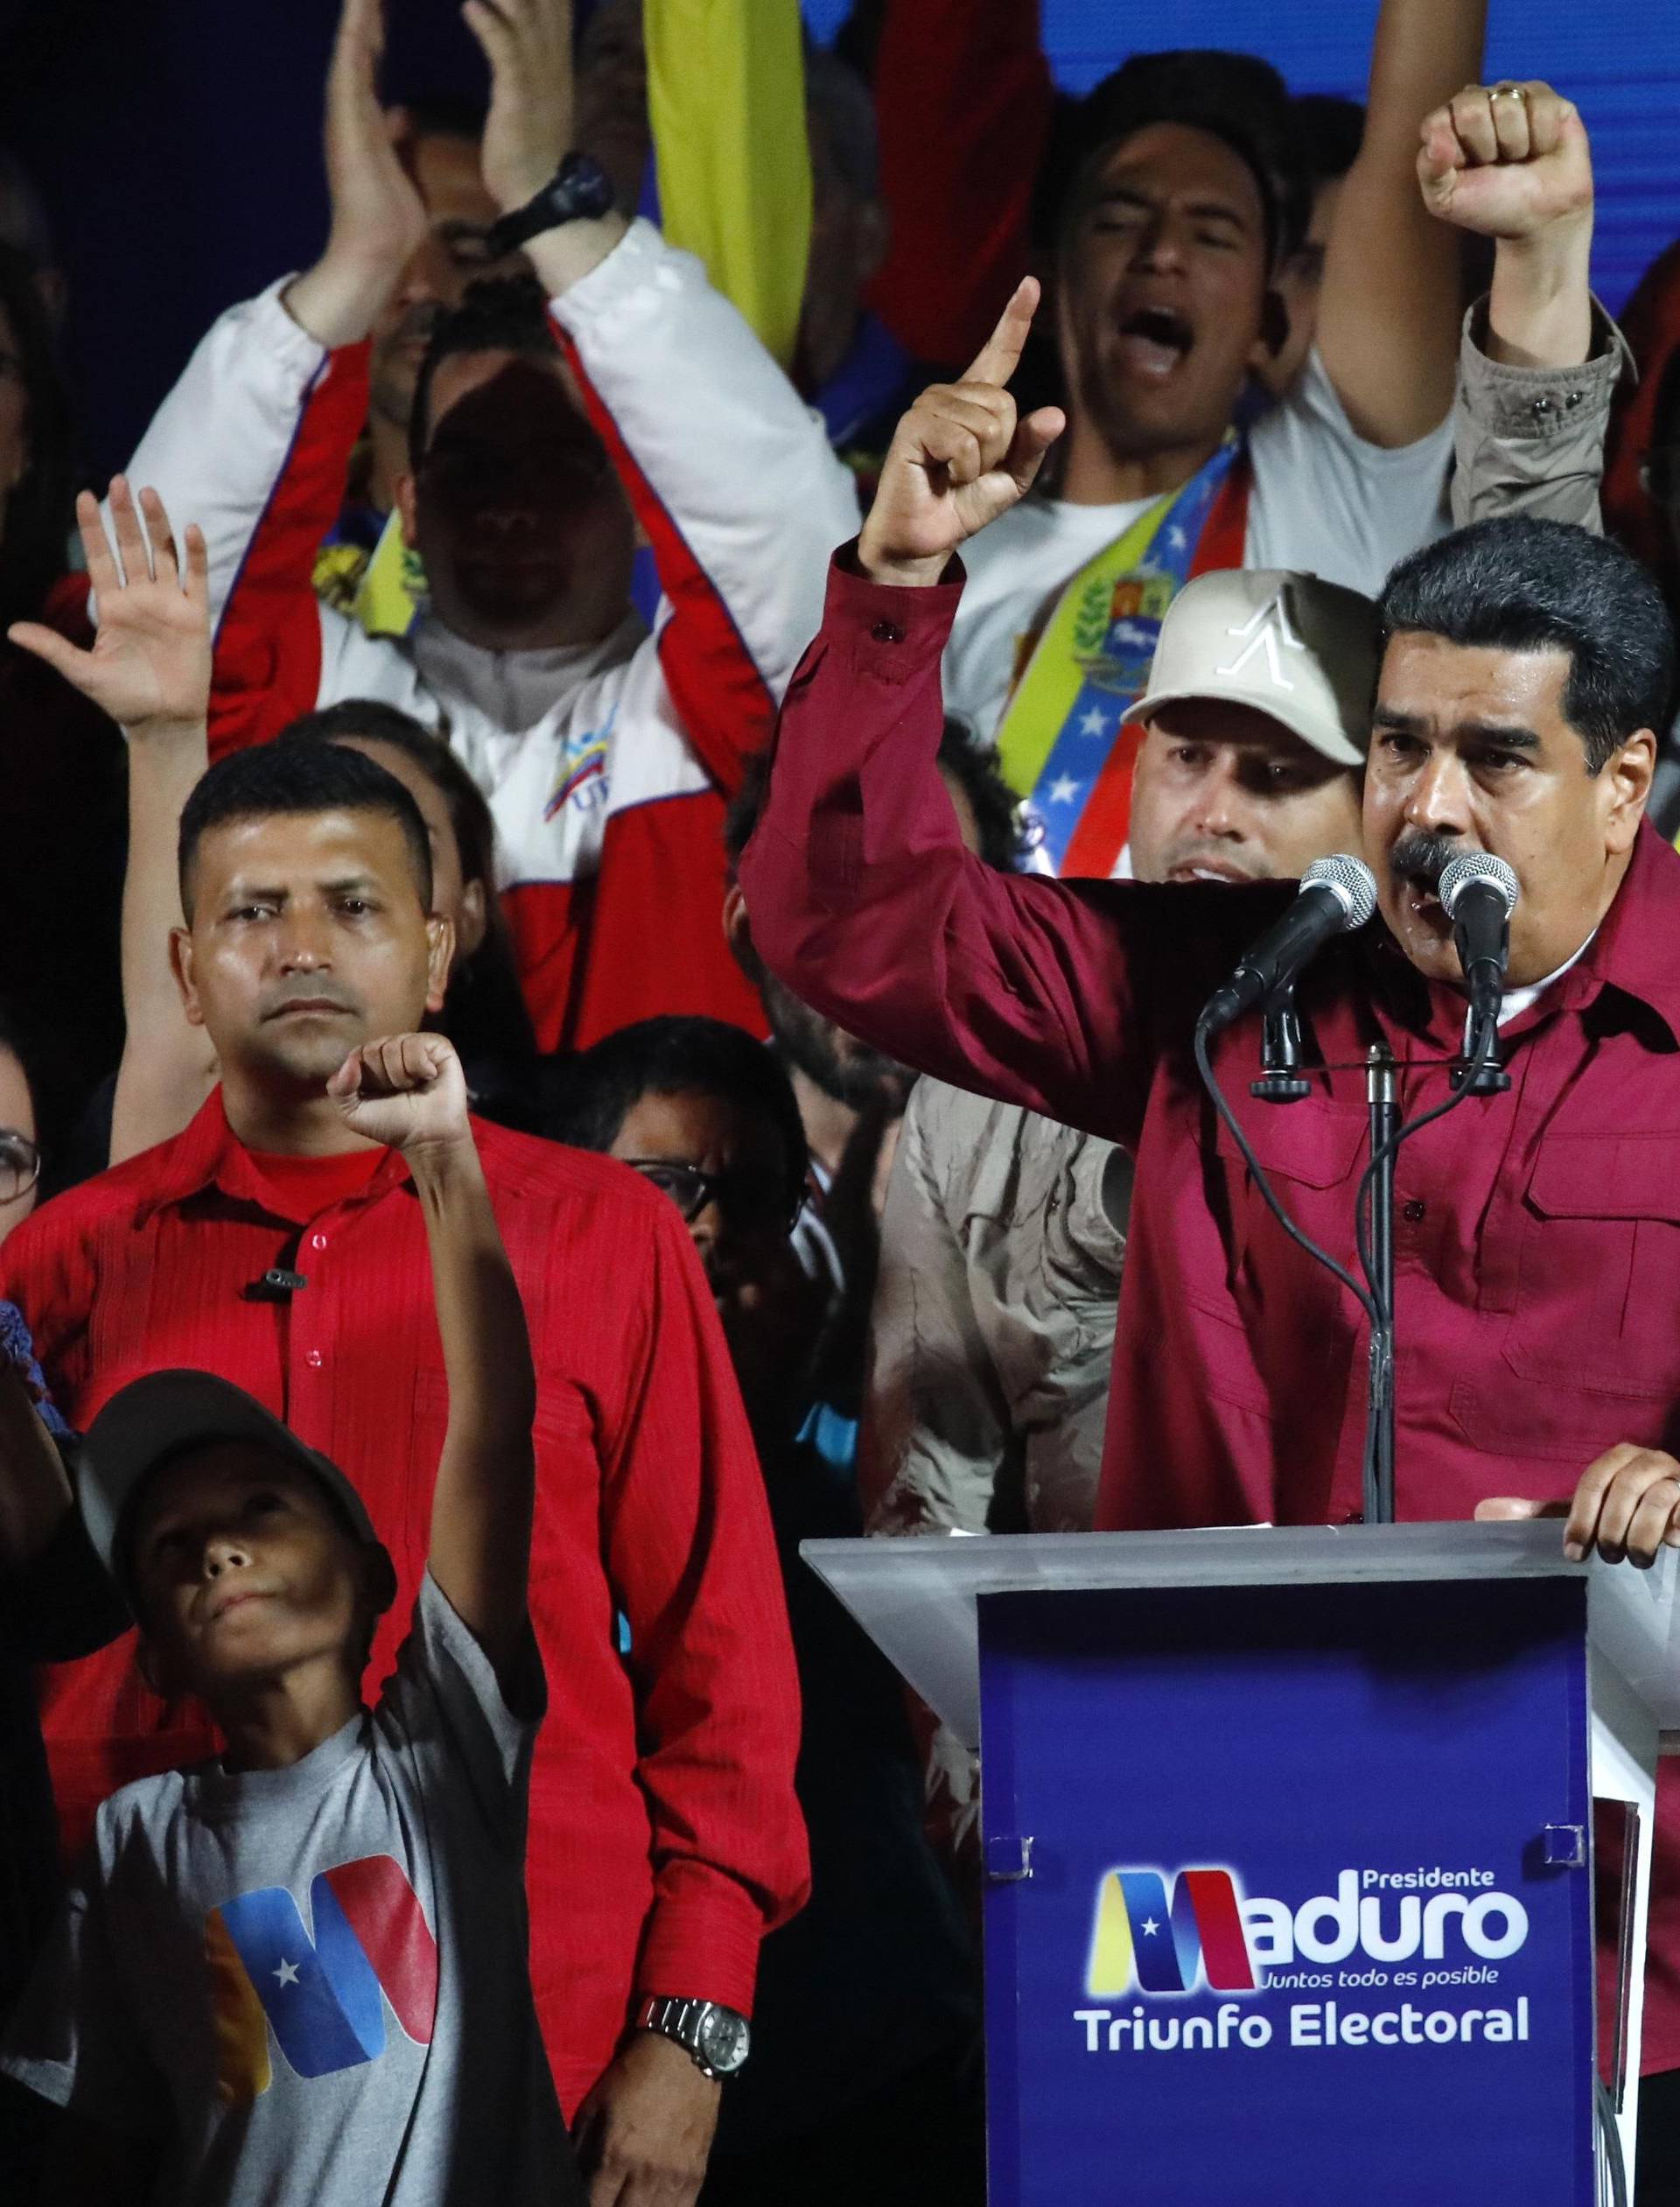 Venezuela's President Maduro stands with supporters after the results of the election were released in Caracas